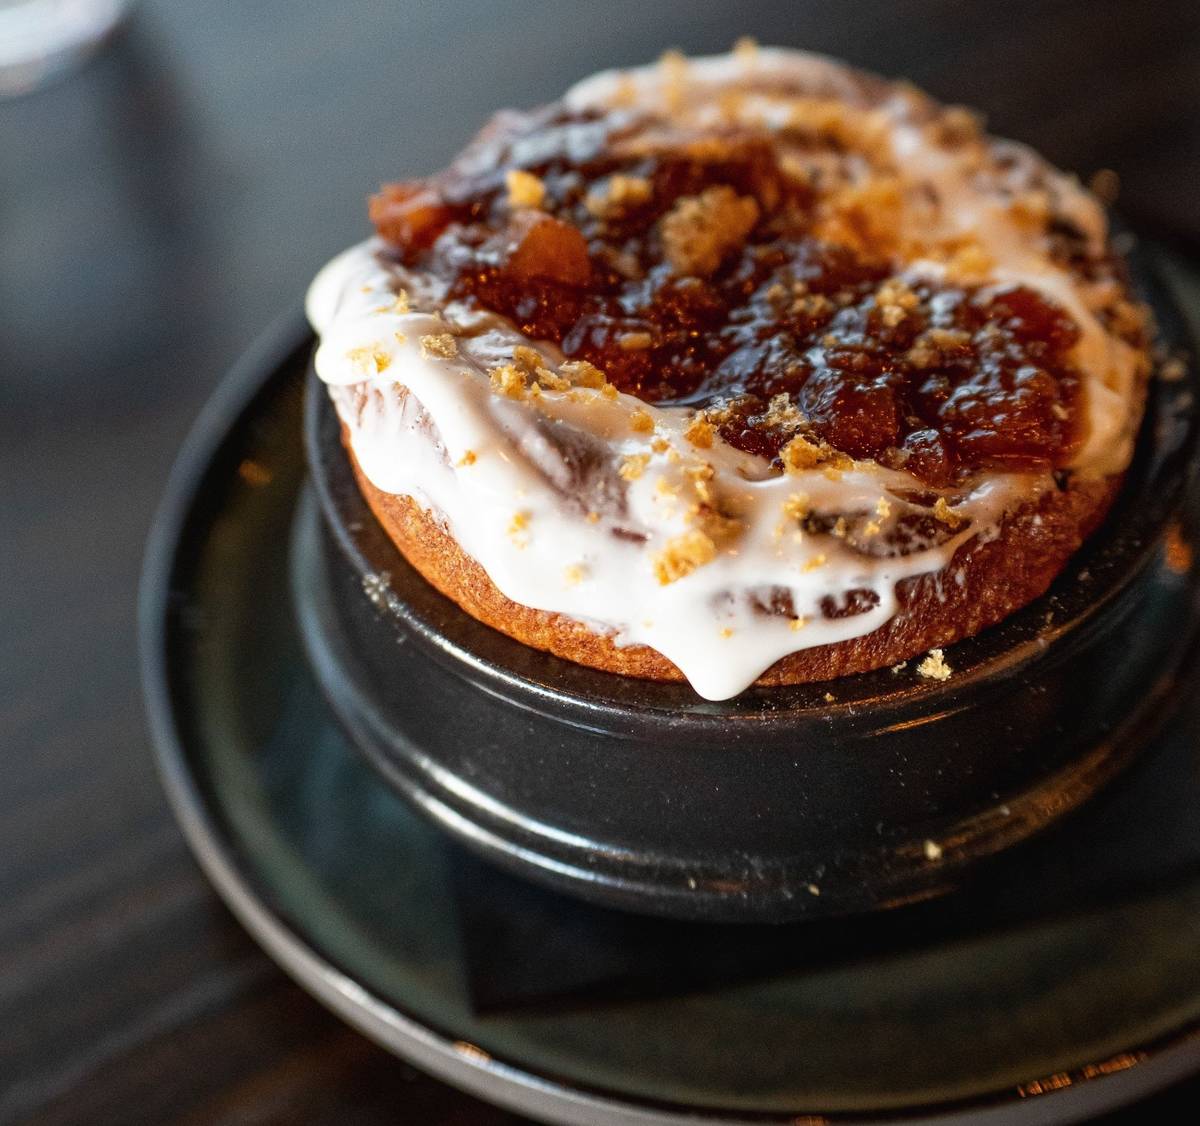 Duck confit cinnamon roll at Sparrow + Wolf. (Sparrow + Wolf)